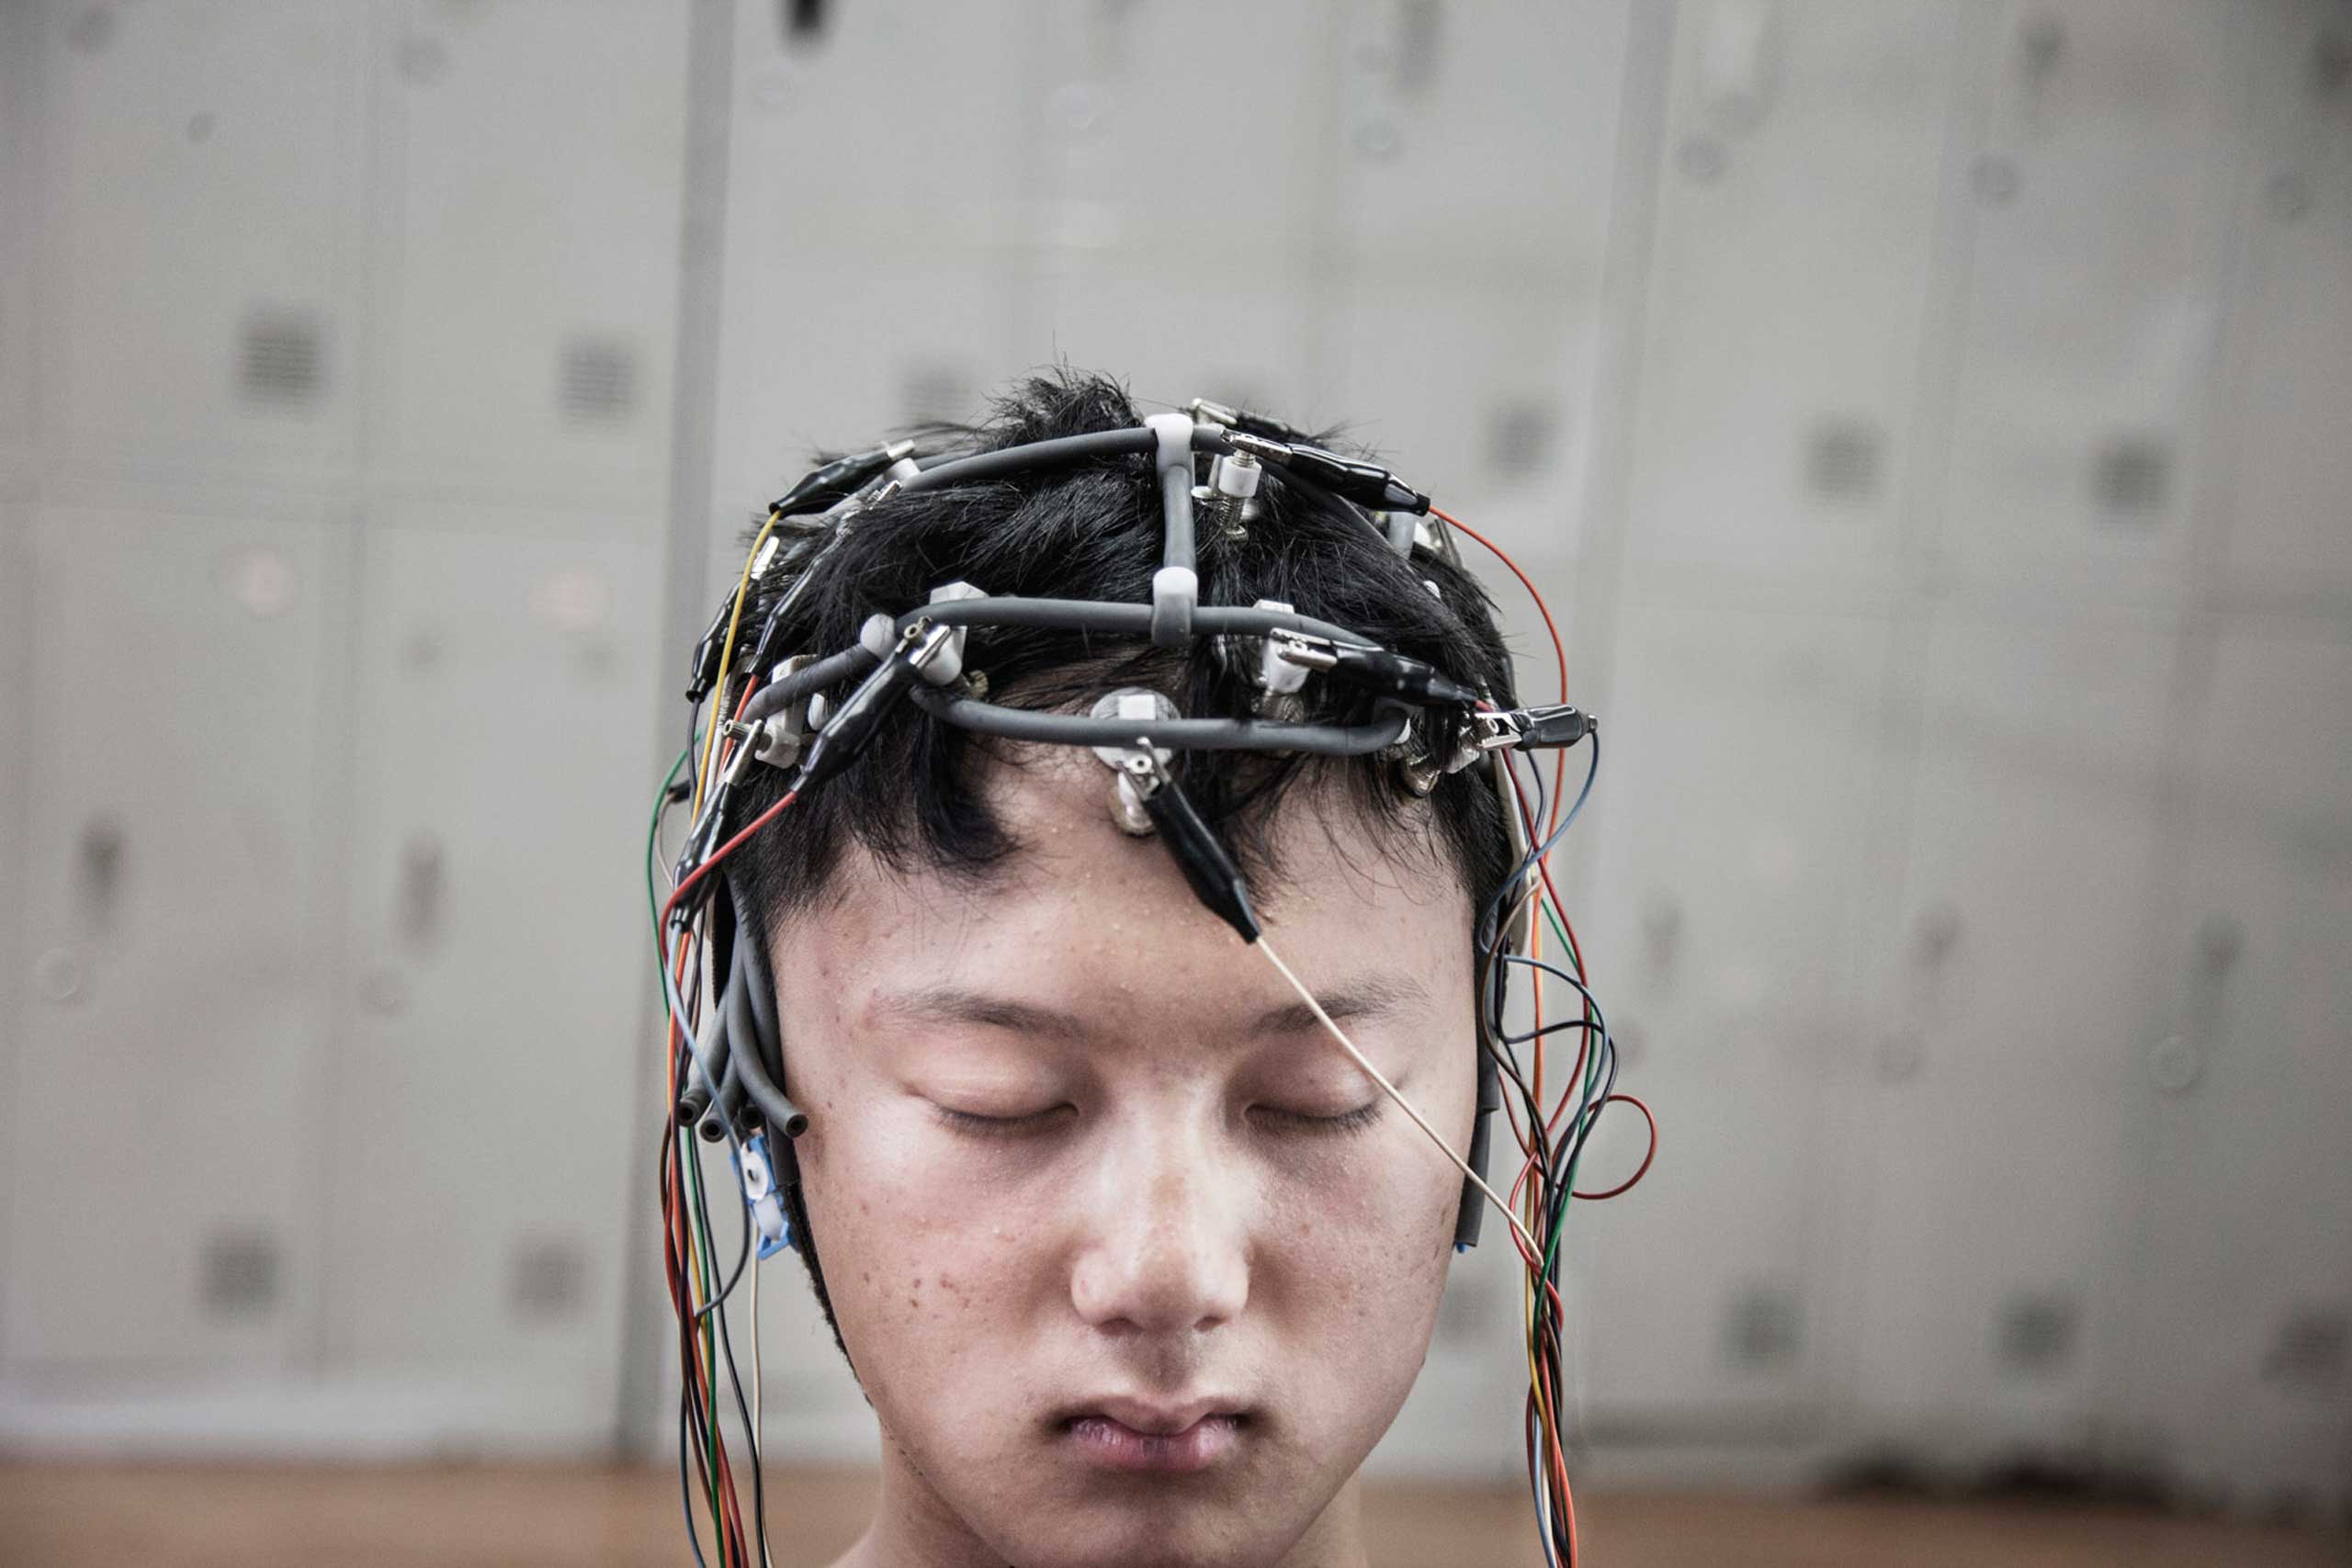 Al Jazeera America:  Inside an Internet Gaming Disorder Rehab Center in China13-year-old Lu Jung Song is checked with to measure his cerebral bioelectrical activity.